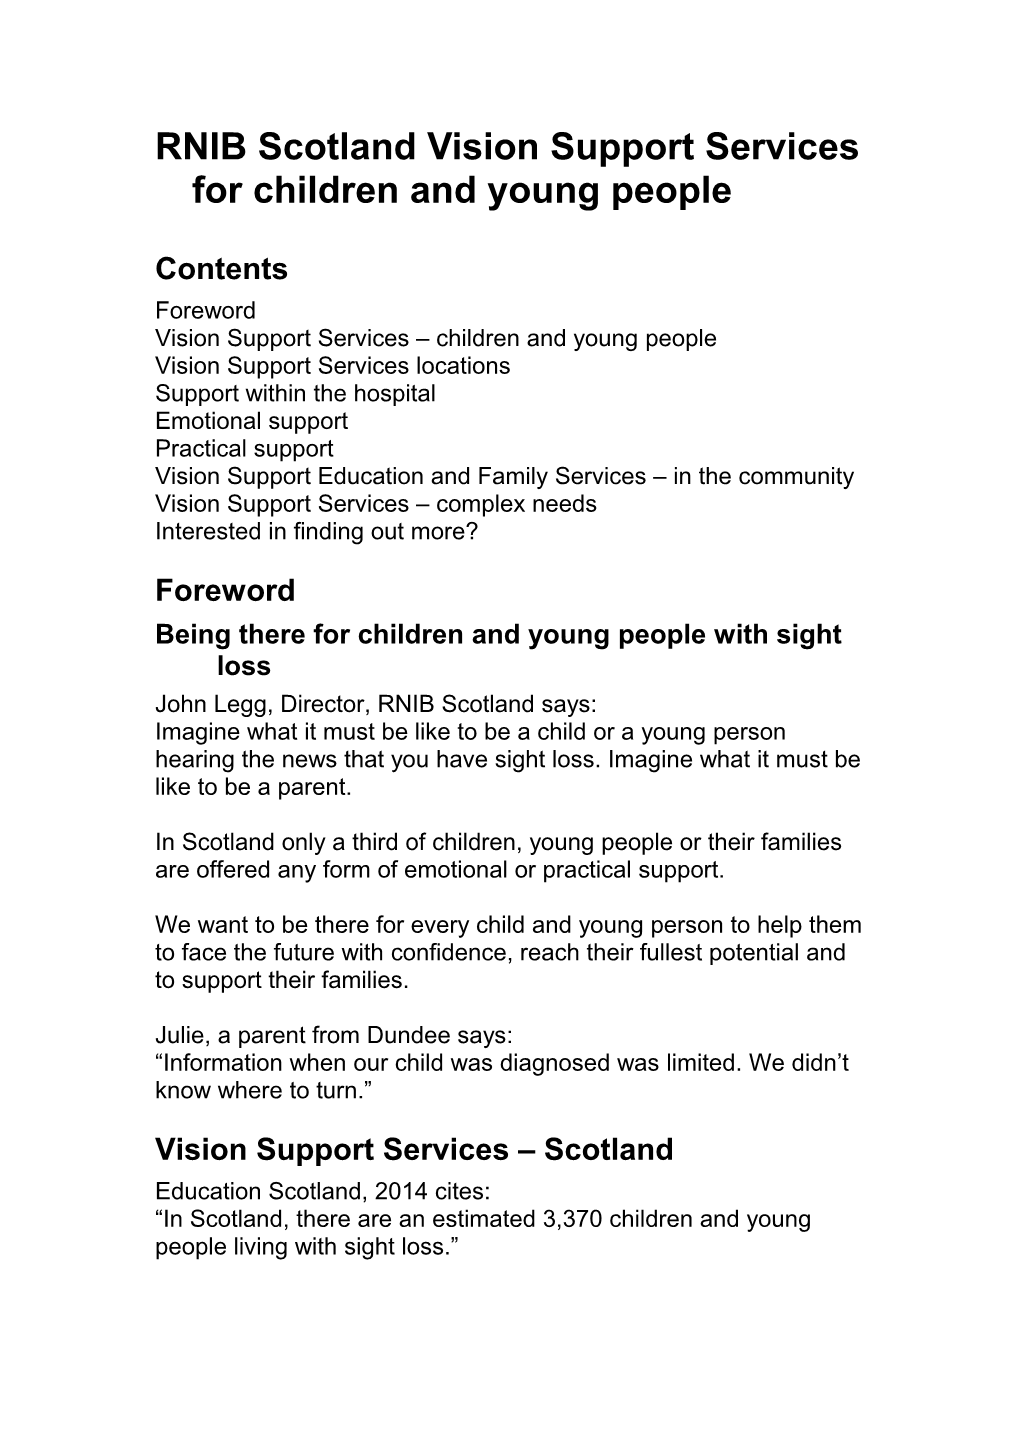 RNIB Scotland Vision Support Services Forchildren and Young People